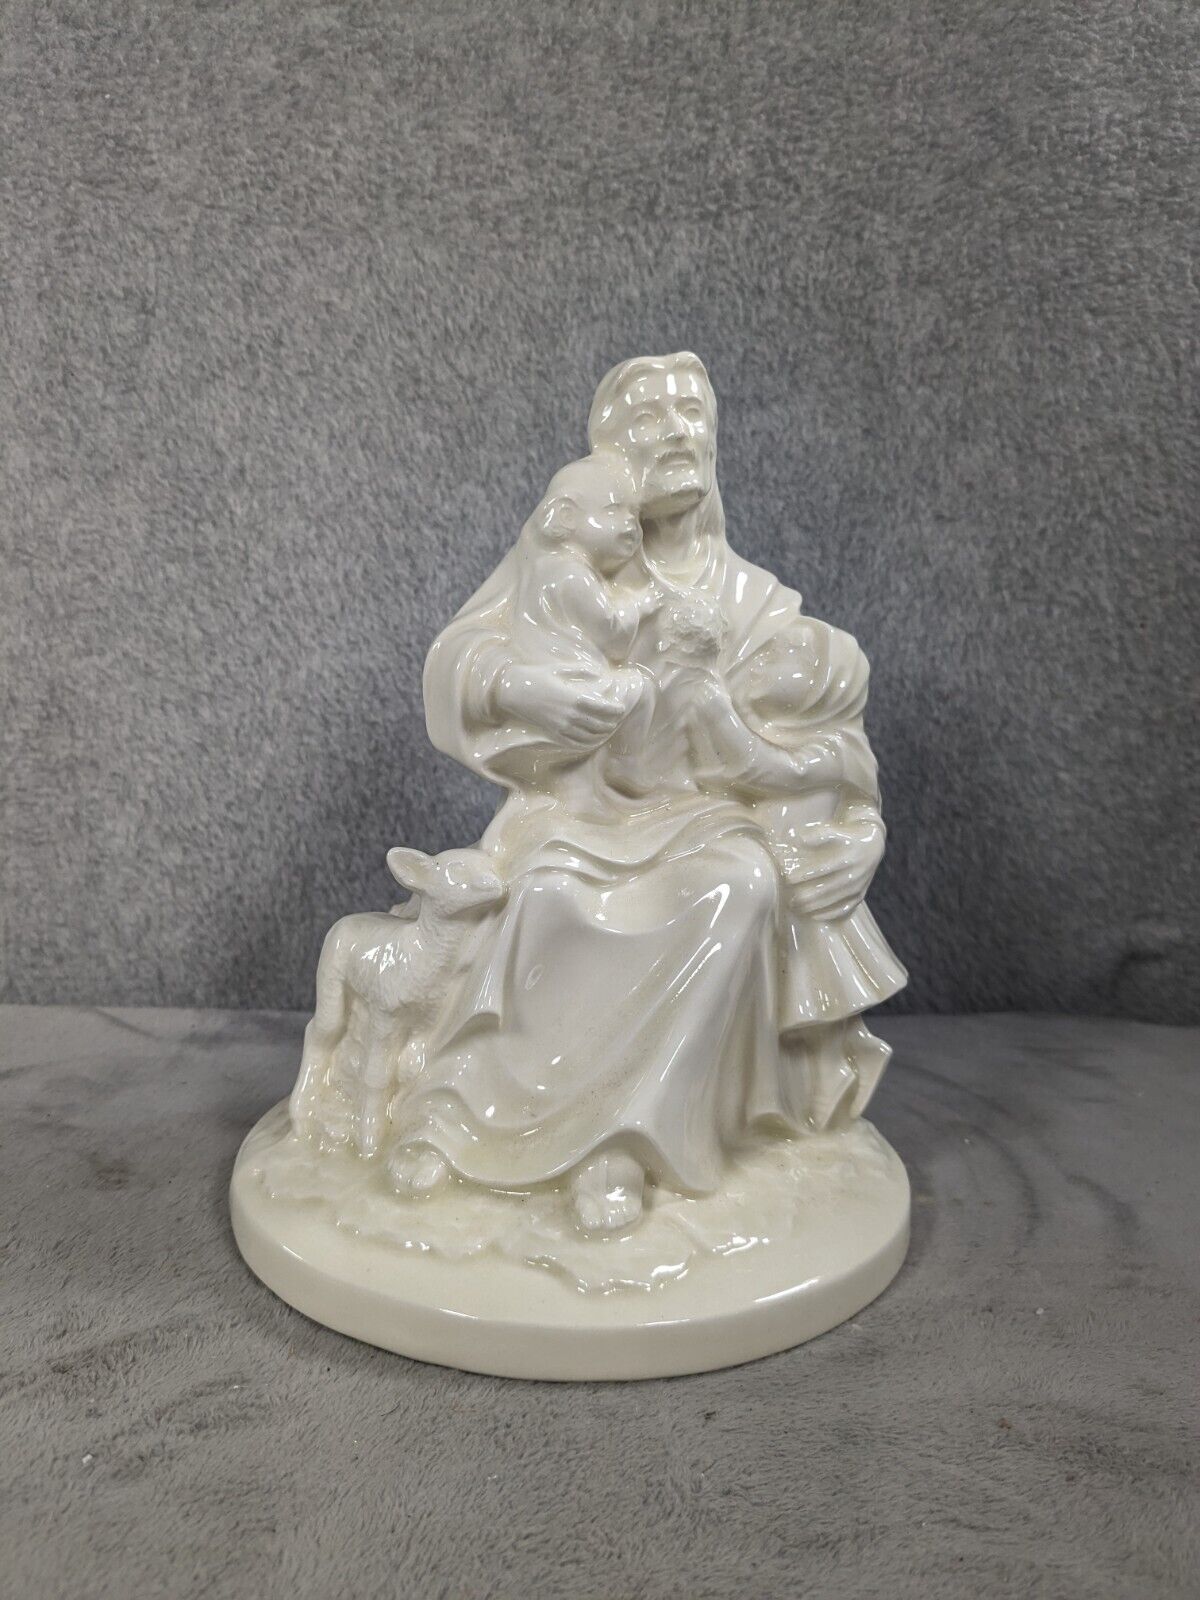 Vintage Ceramic Opalescent Jesus with Lamb & Children Figurine by Ron Molds 1985